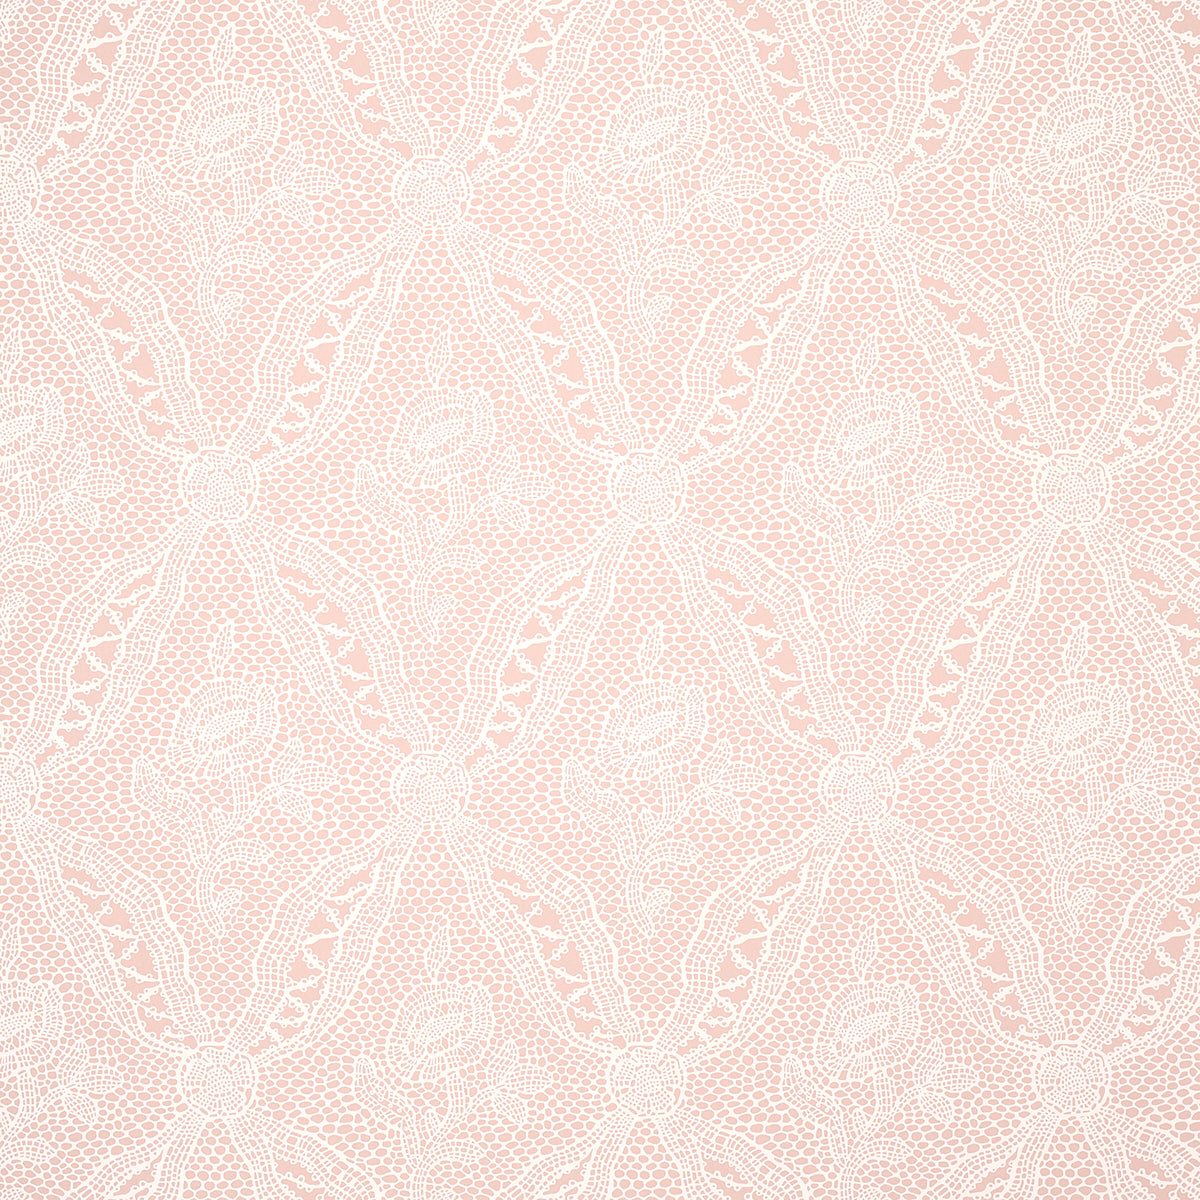 Blush Lace Fabric, Wallpaper and Home Decor